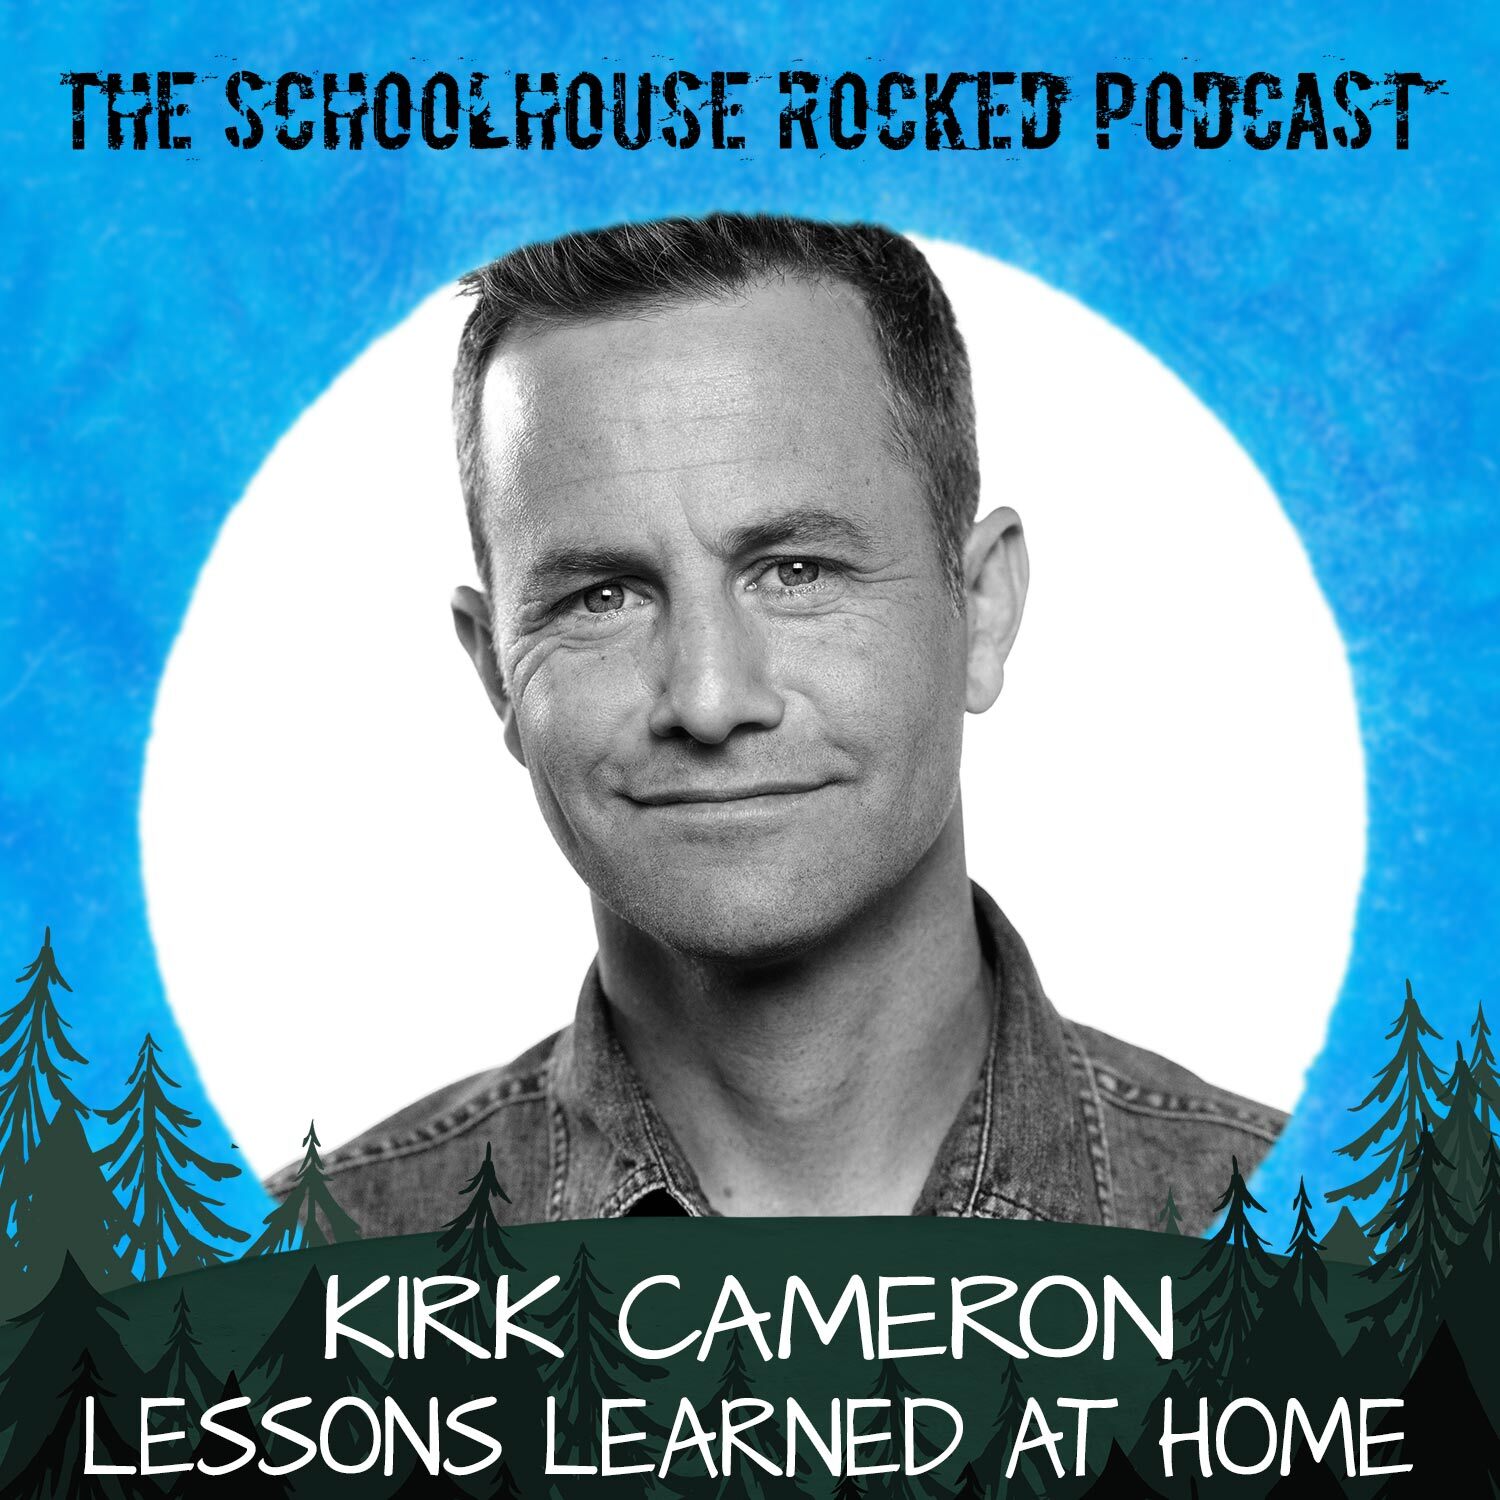 Kirk Cameron Podcast - Lessons Learned at Home